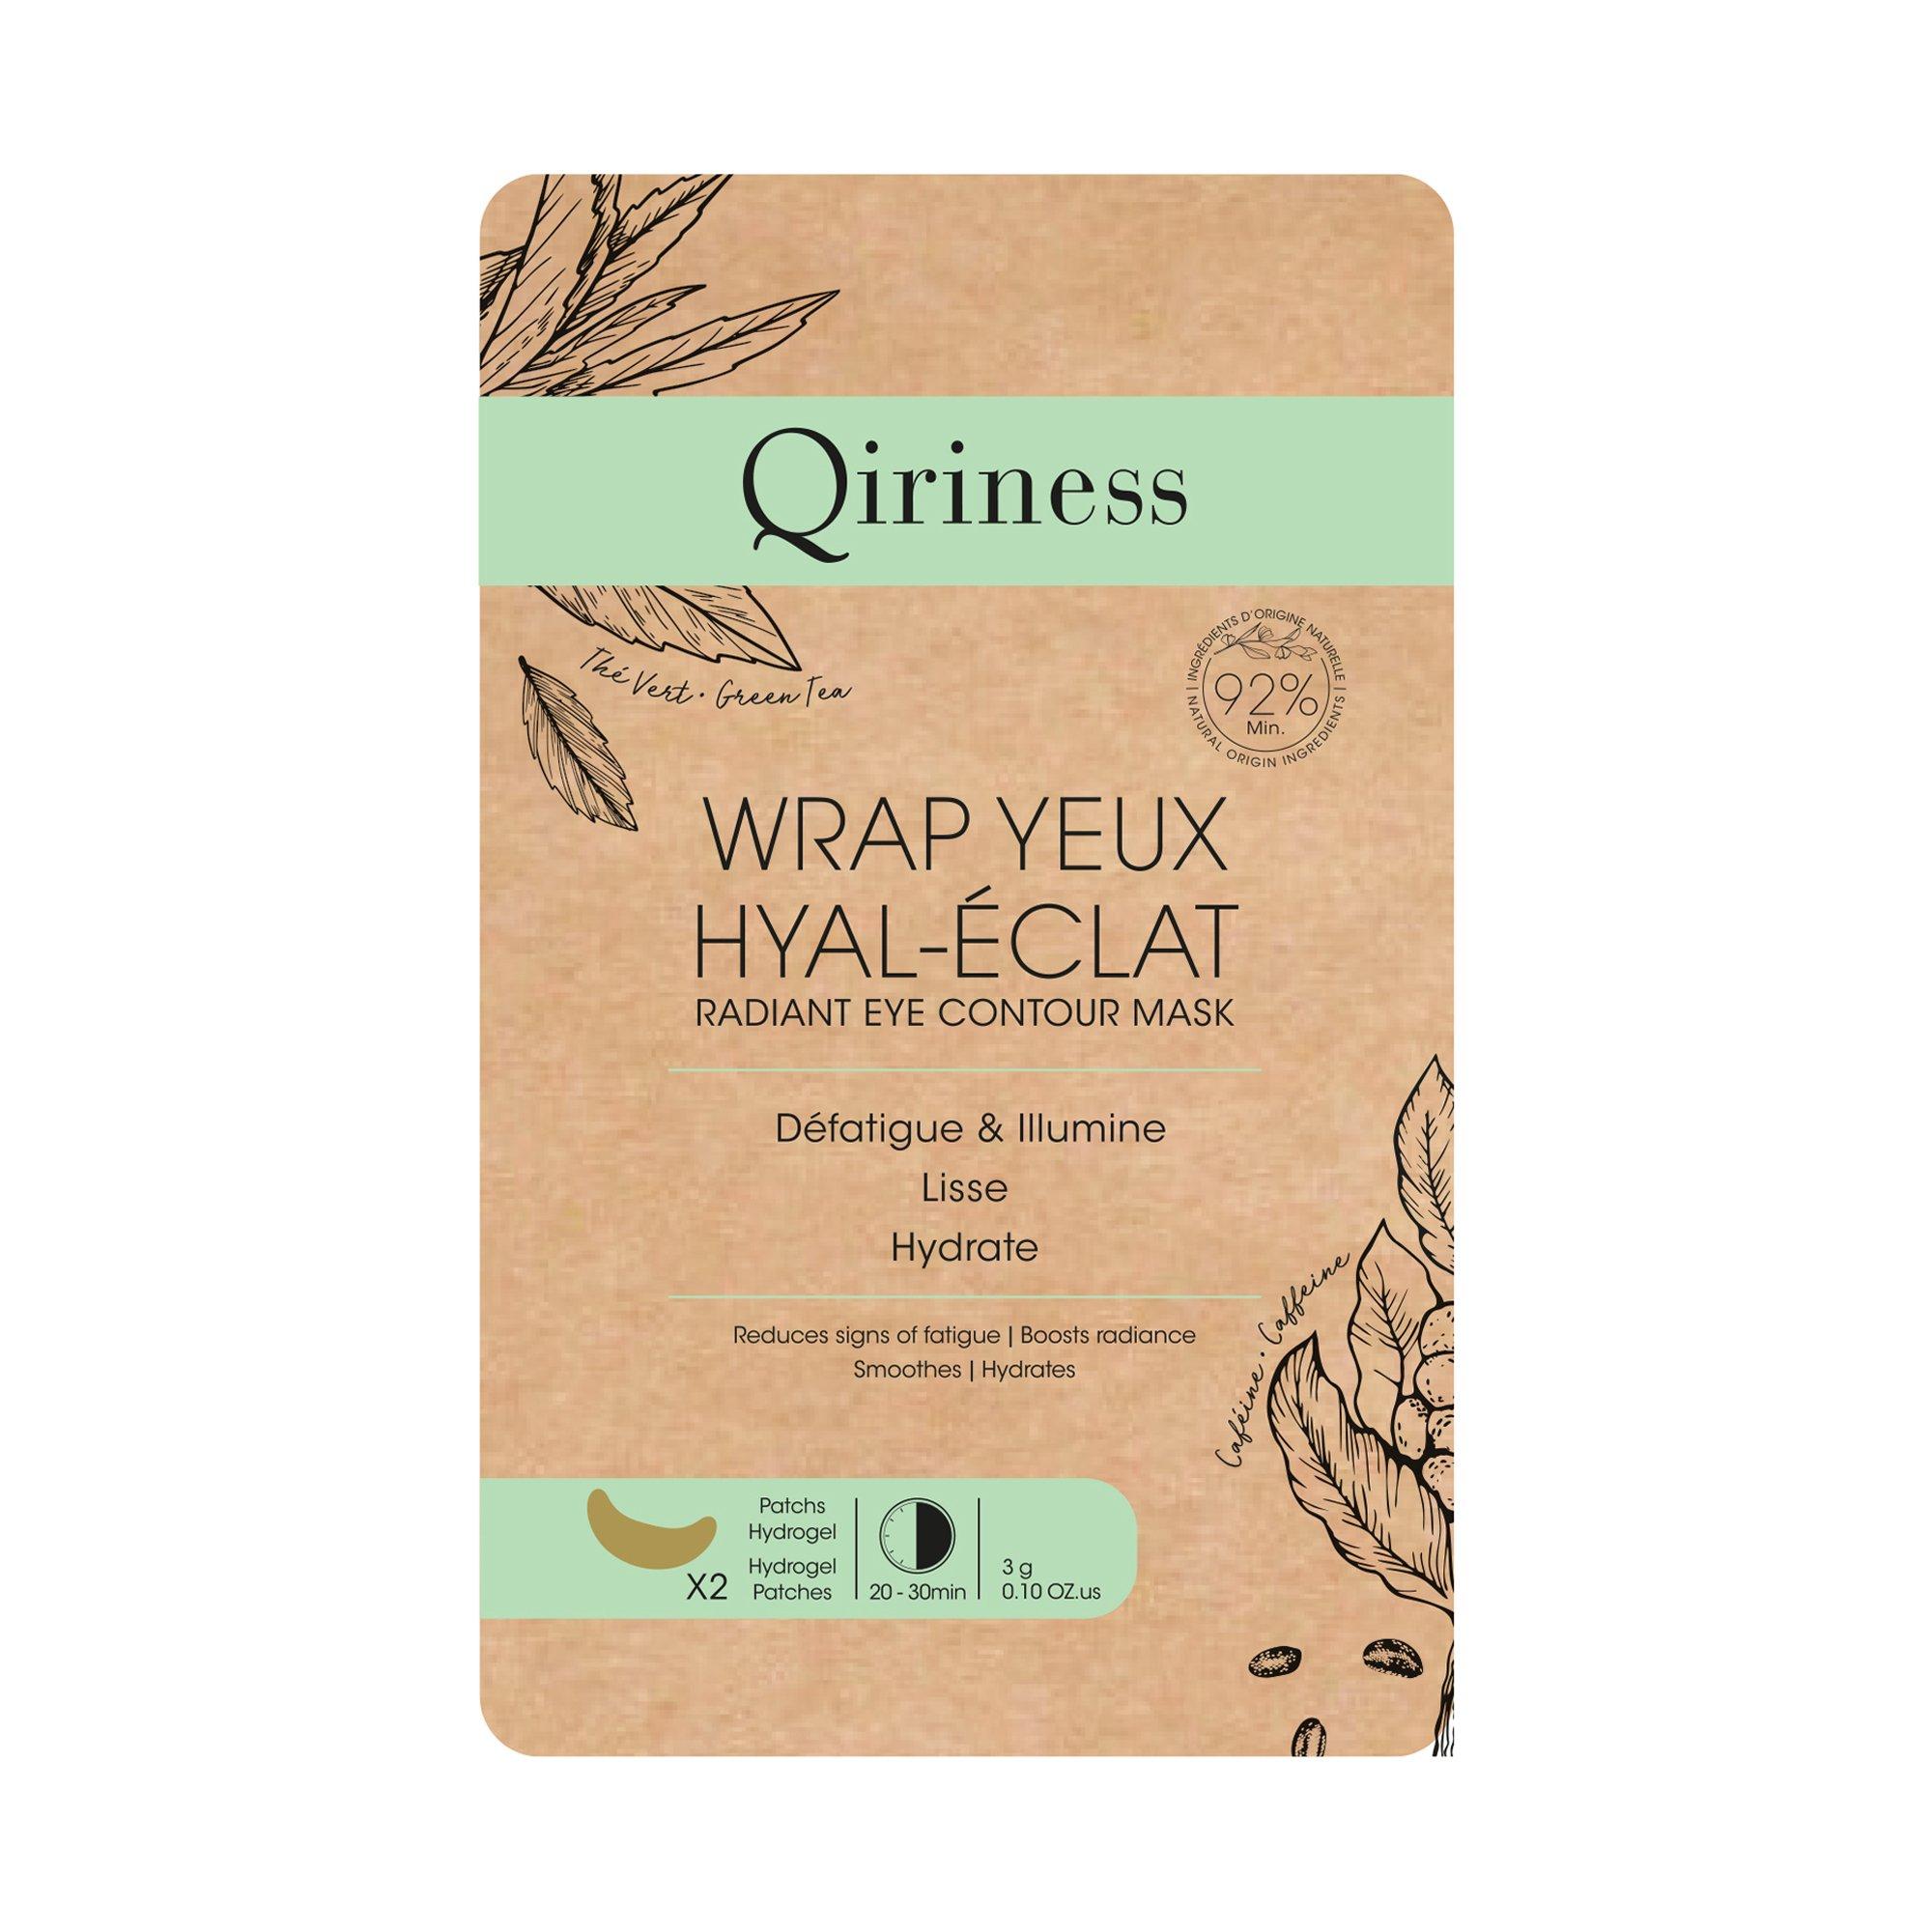 Image of Qiriness Wrap Yeux Hyal-Eclat Radiant Eye Contour Mask - 1 Coppia